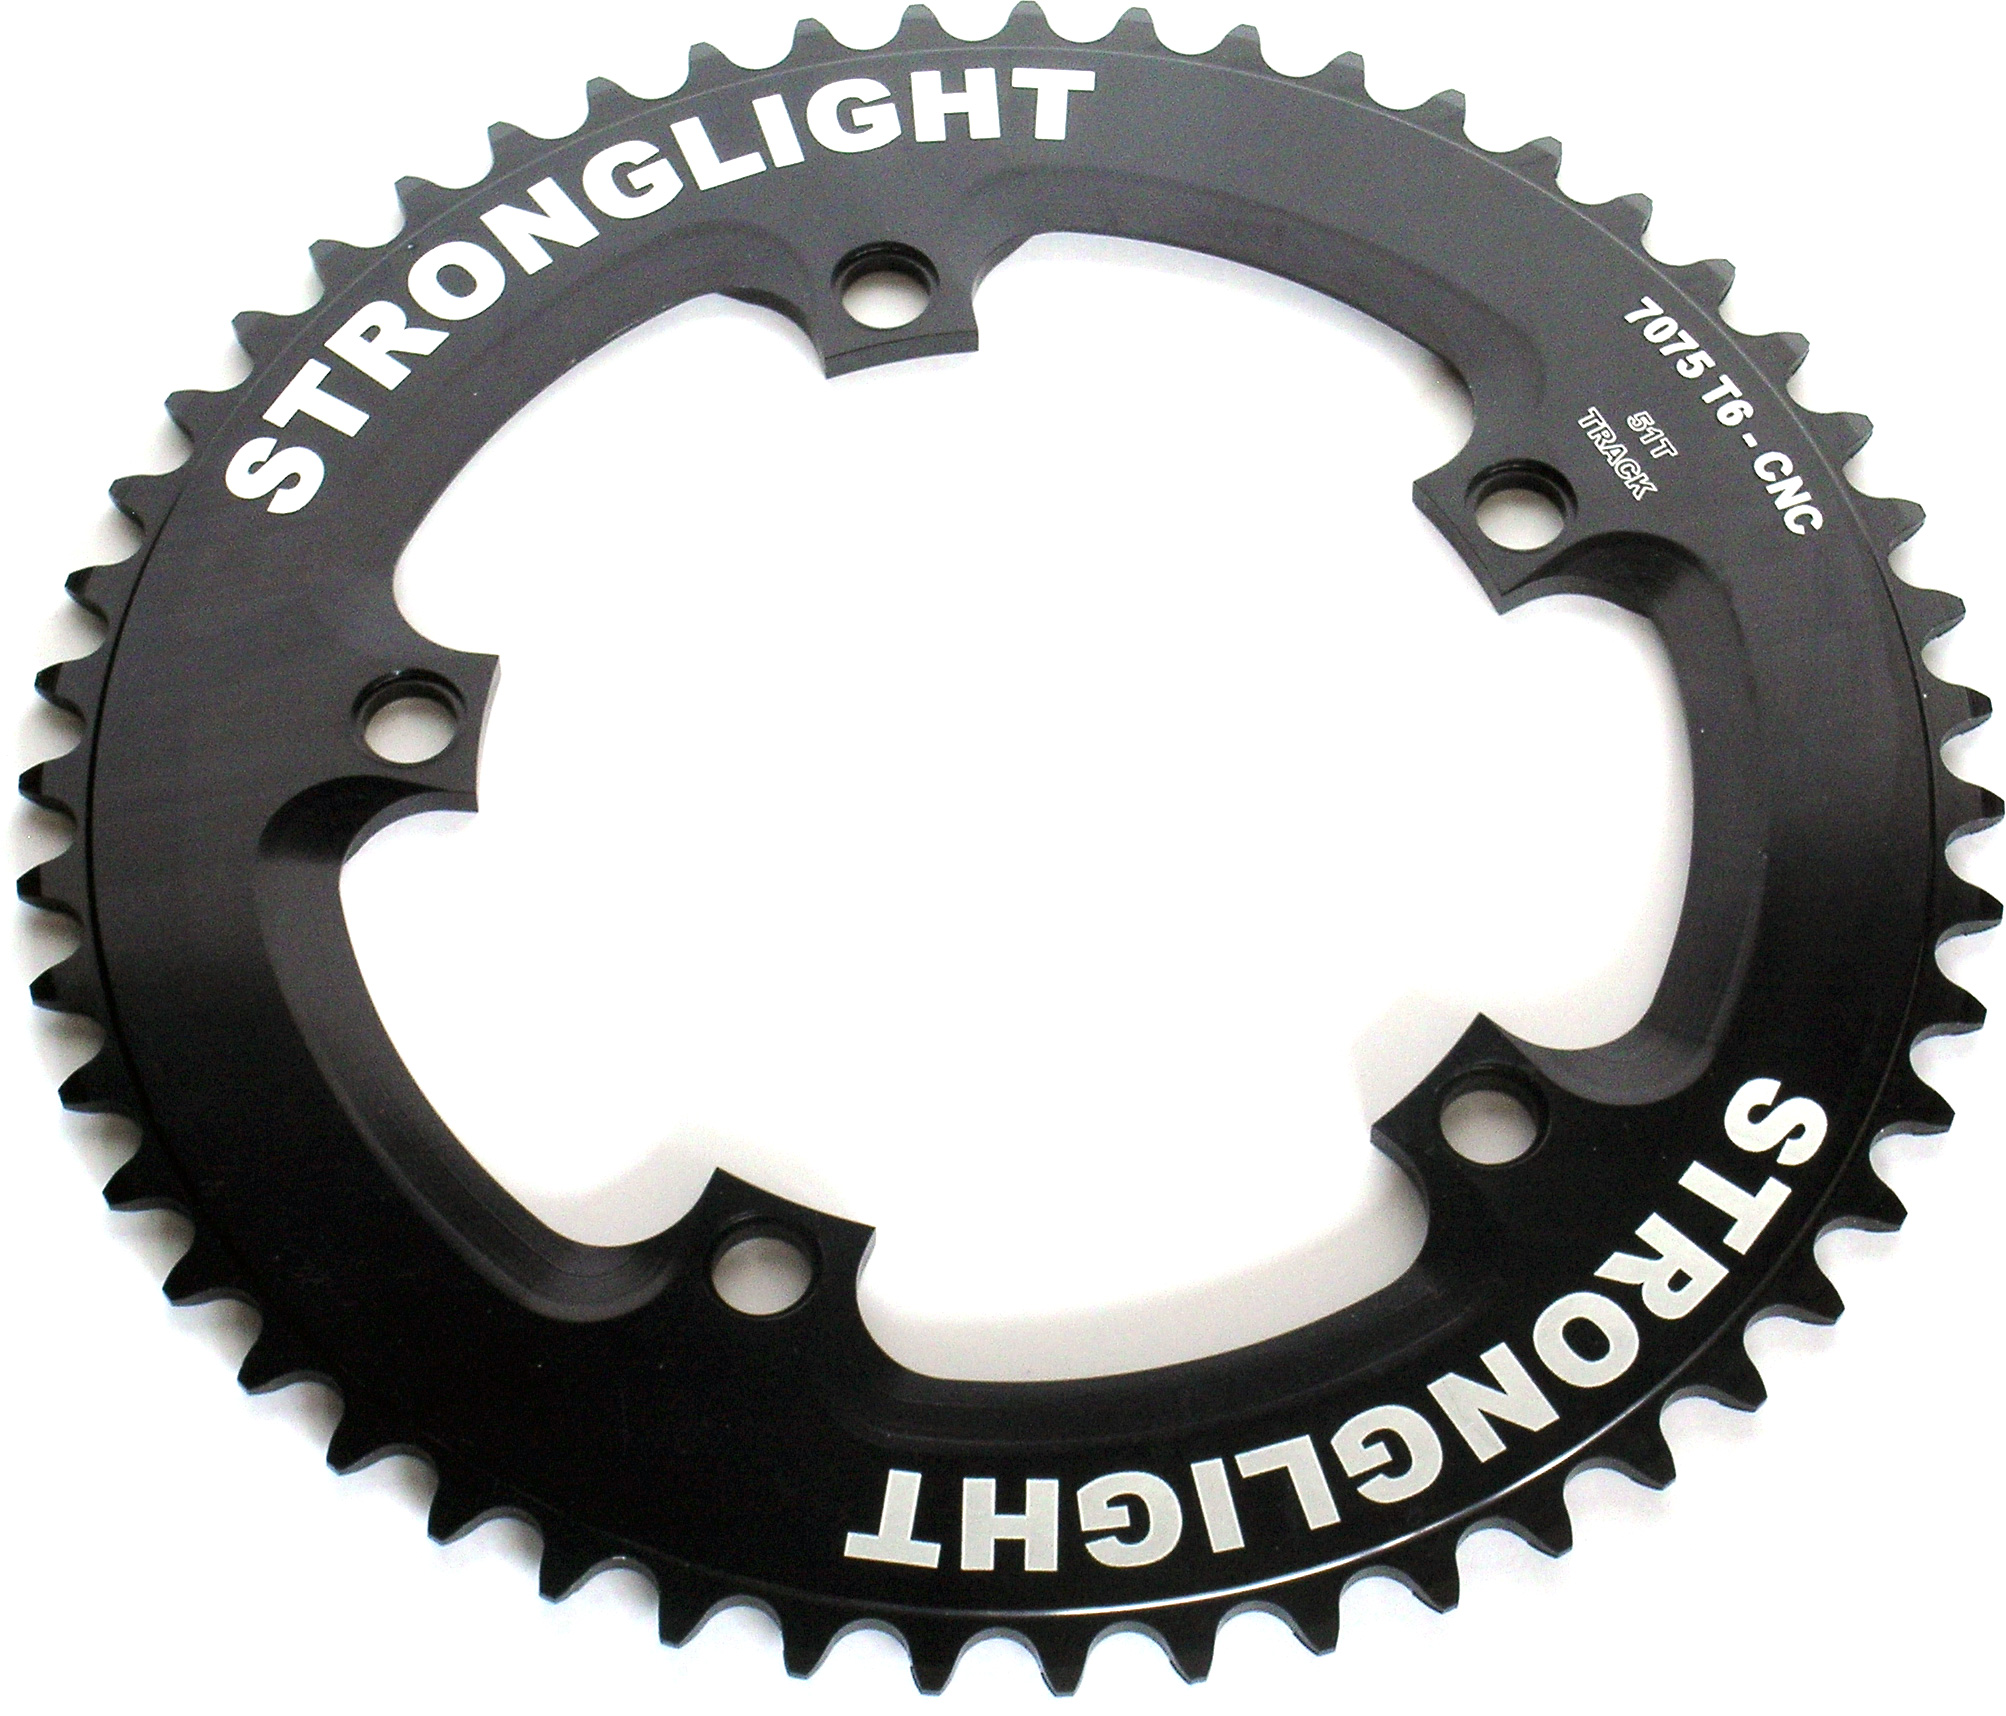 RT130Z51 Stronglight Black 51T 5-Arm/130mm Track Chainring